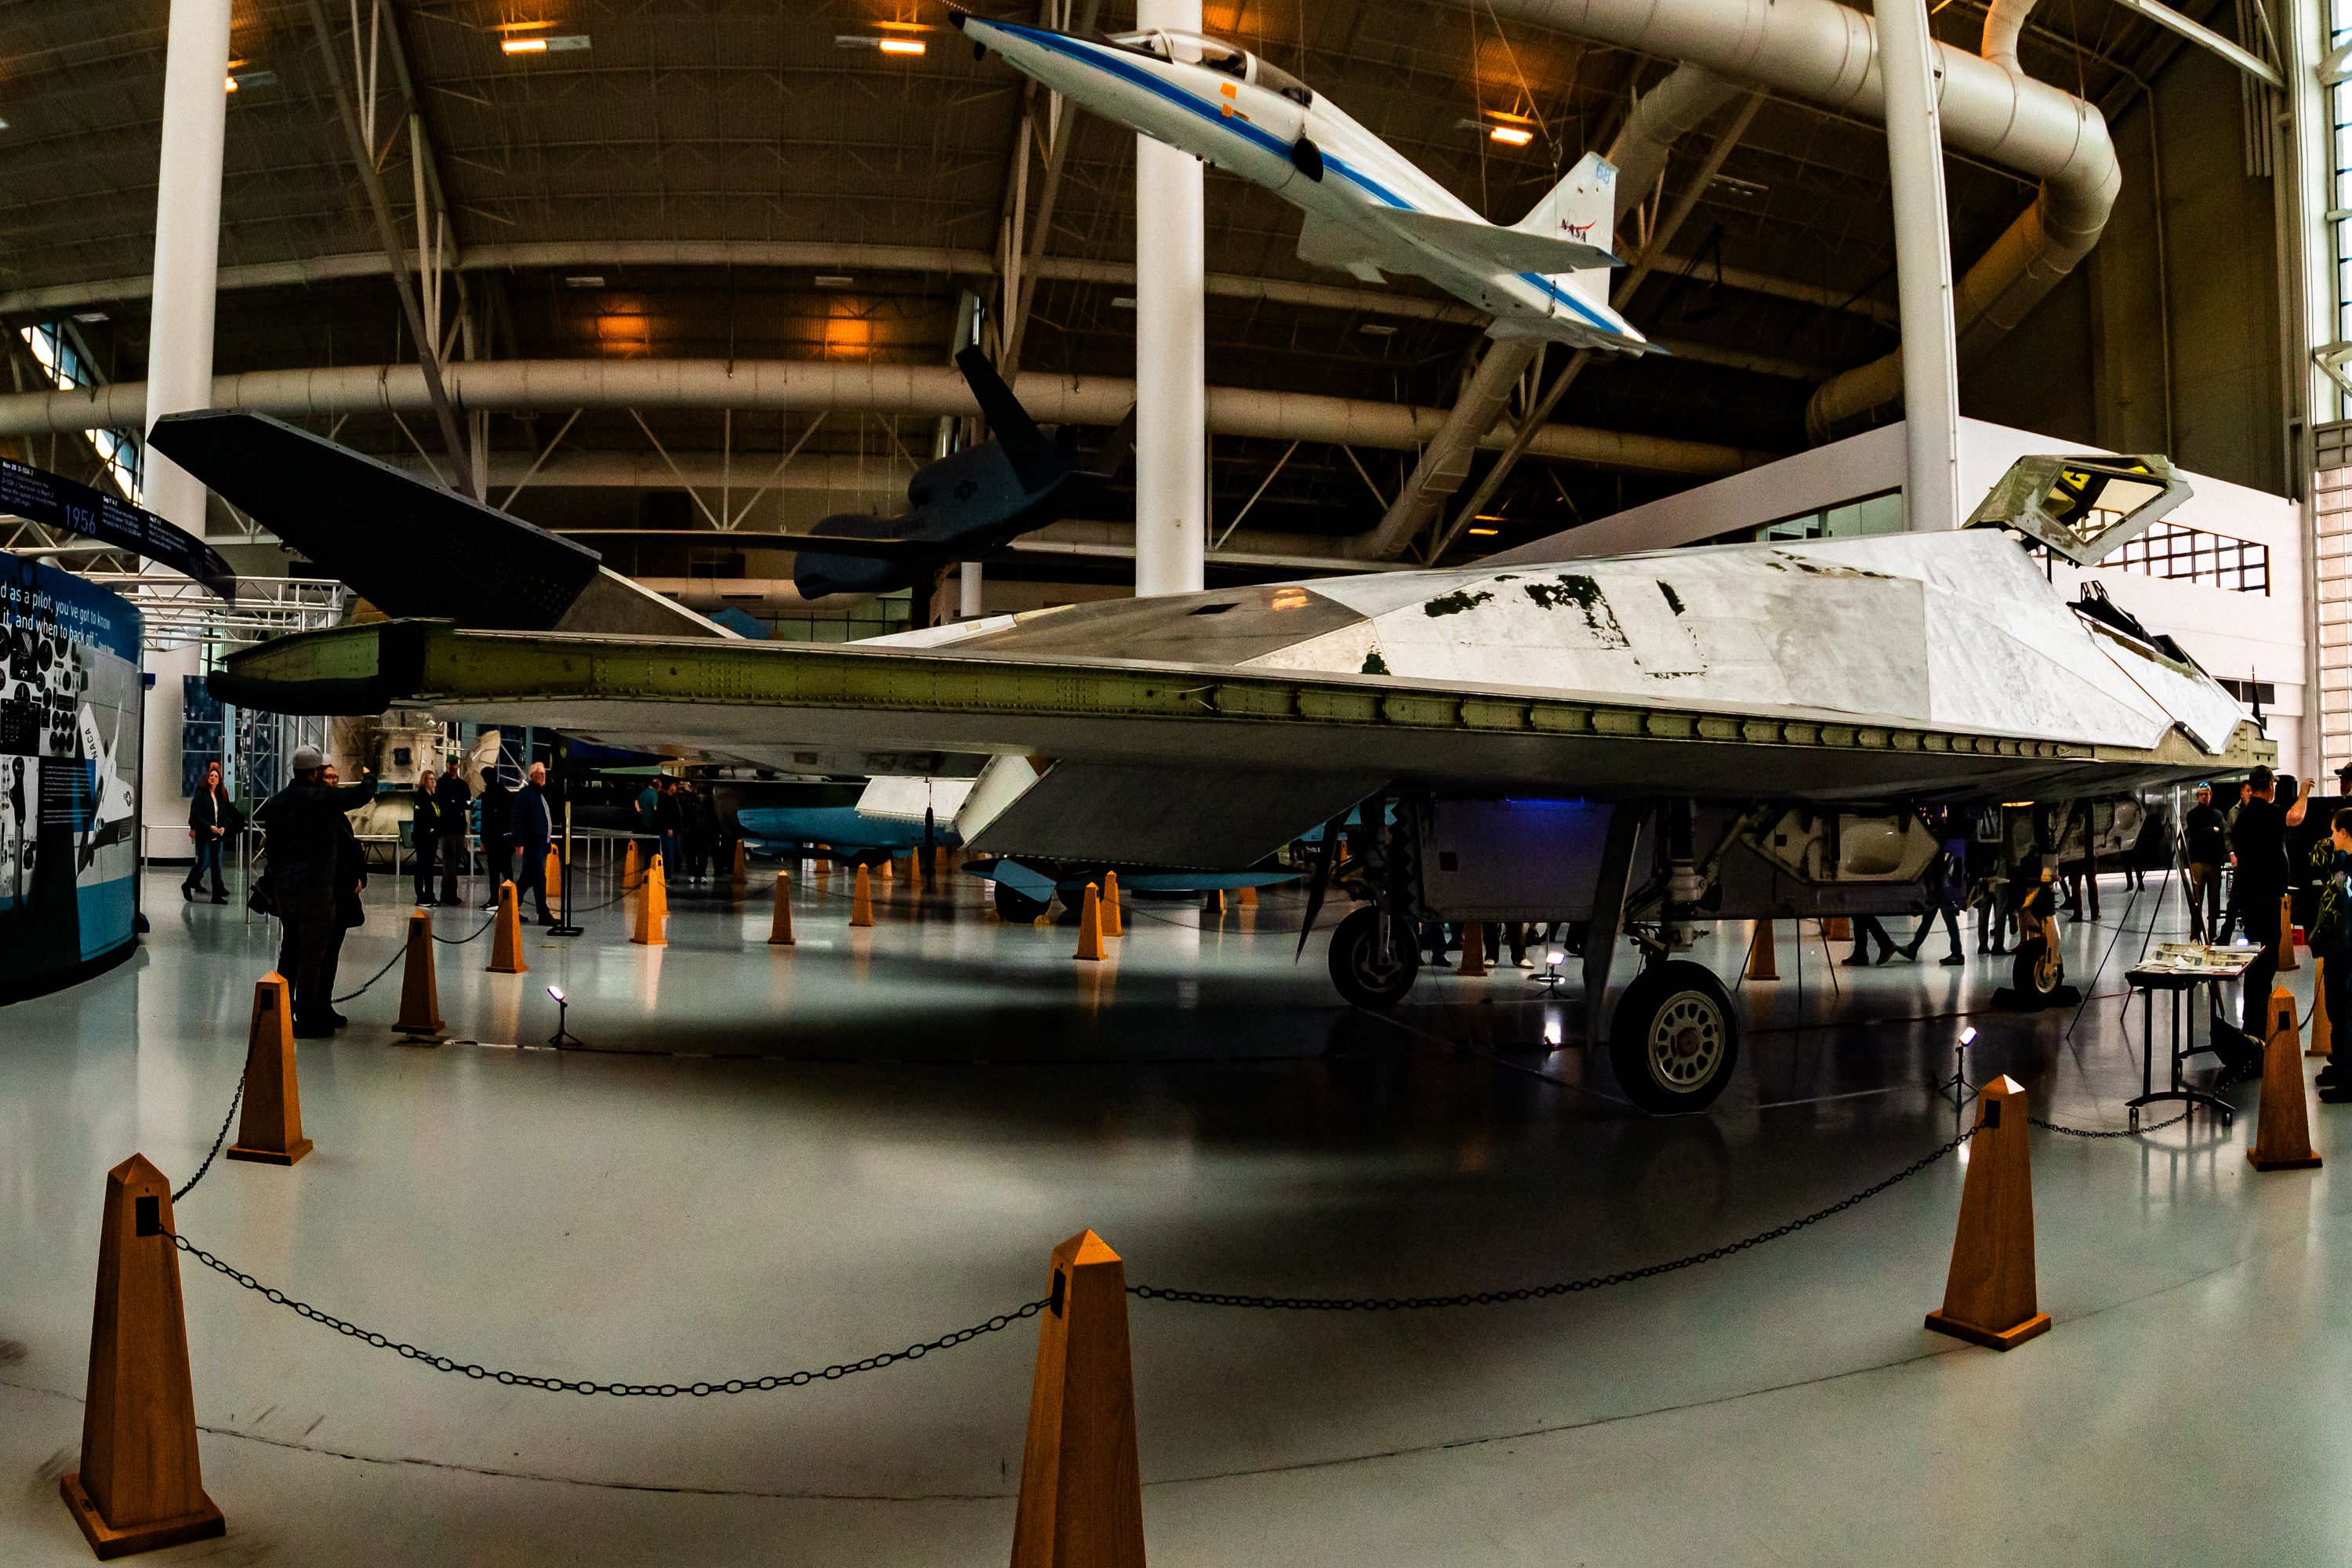 SF_3x4 Panorama of Evergreen Aivation & Space Museum F-117A_JAK